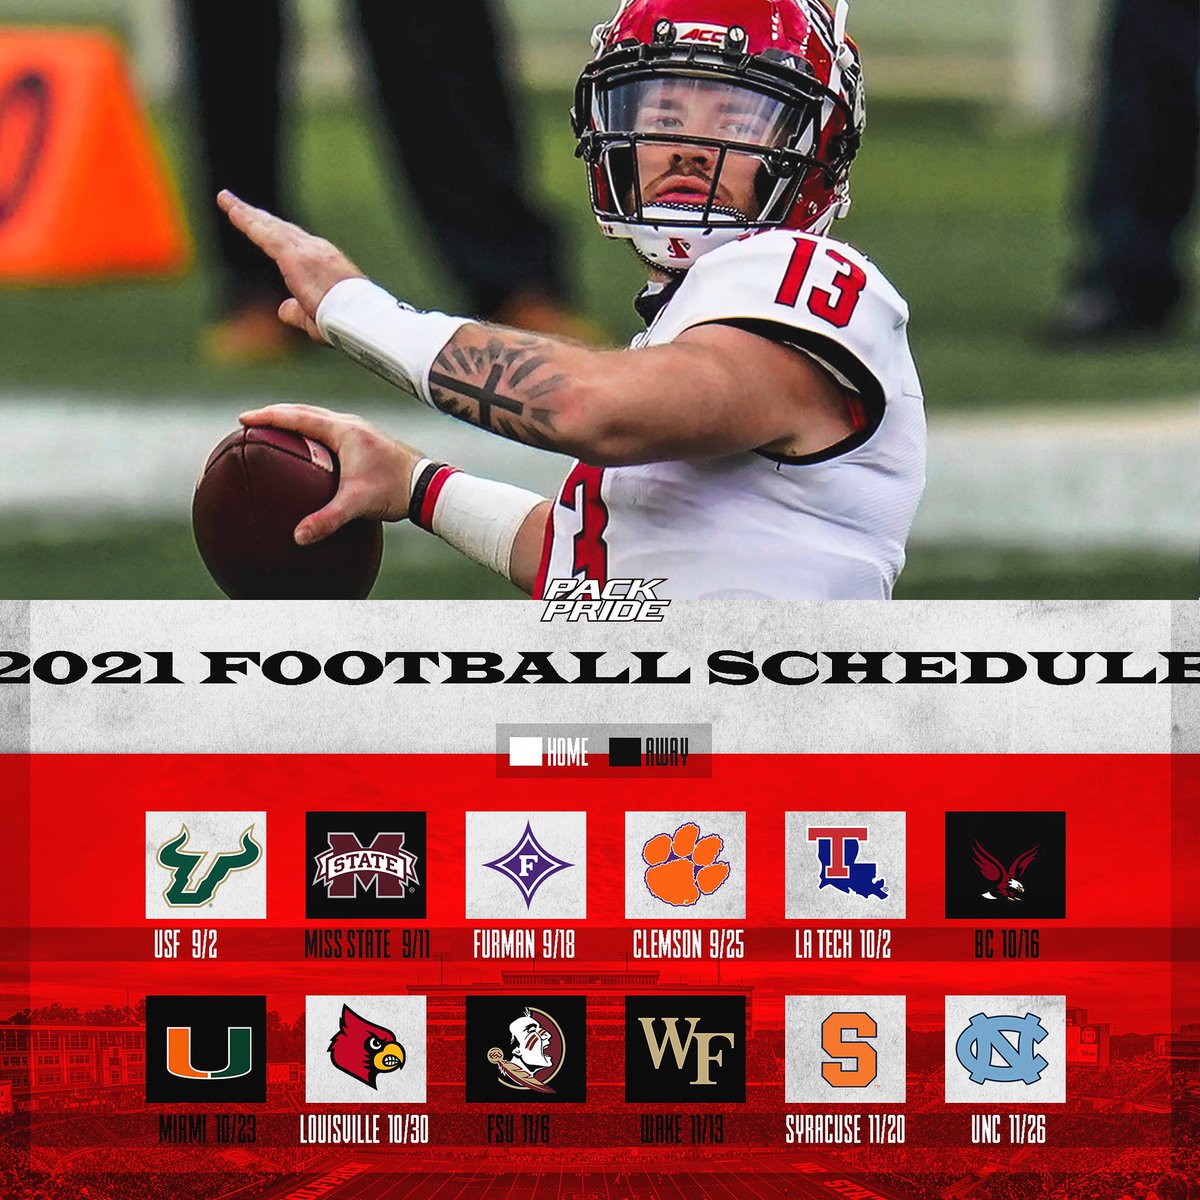 Ncsu 2022 Football Schedule Pack Pride On Twitter: "🚨 The 2021 Nc State Football Schedule Is Out! 🚨  👇 Check Out The Full Breakdown Here 👇 Https://T.co/Pc2Ncbmpiz" / Twitter